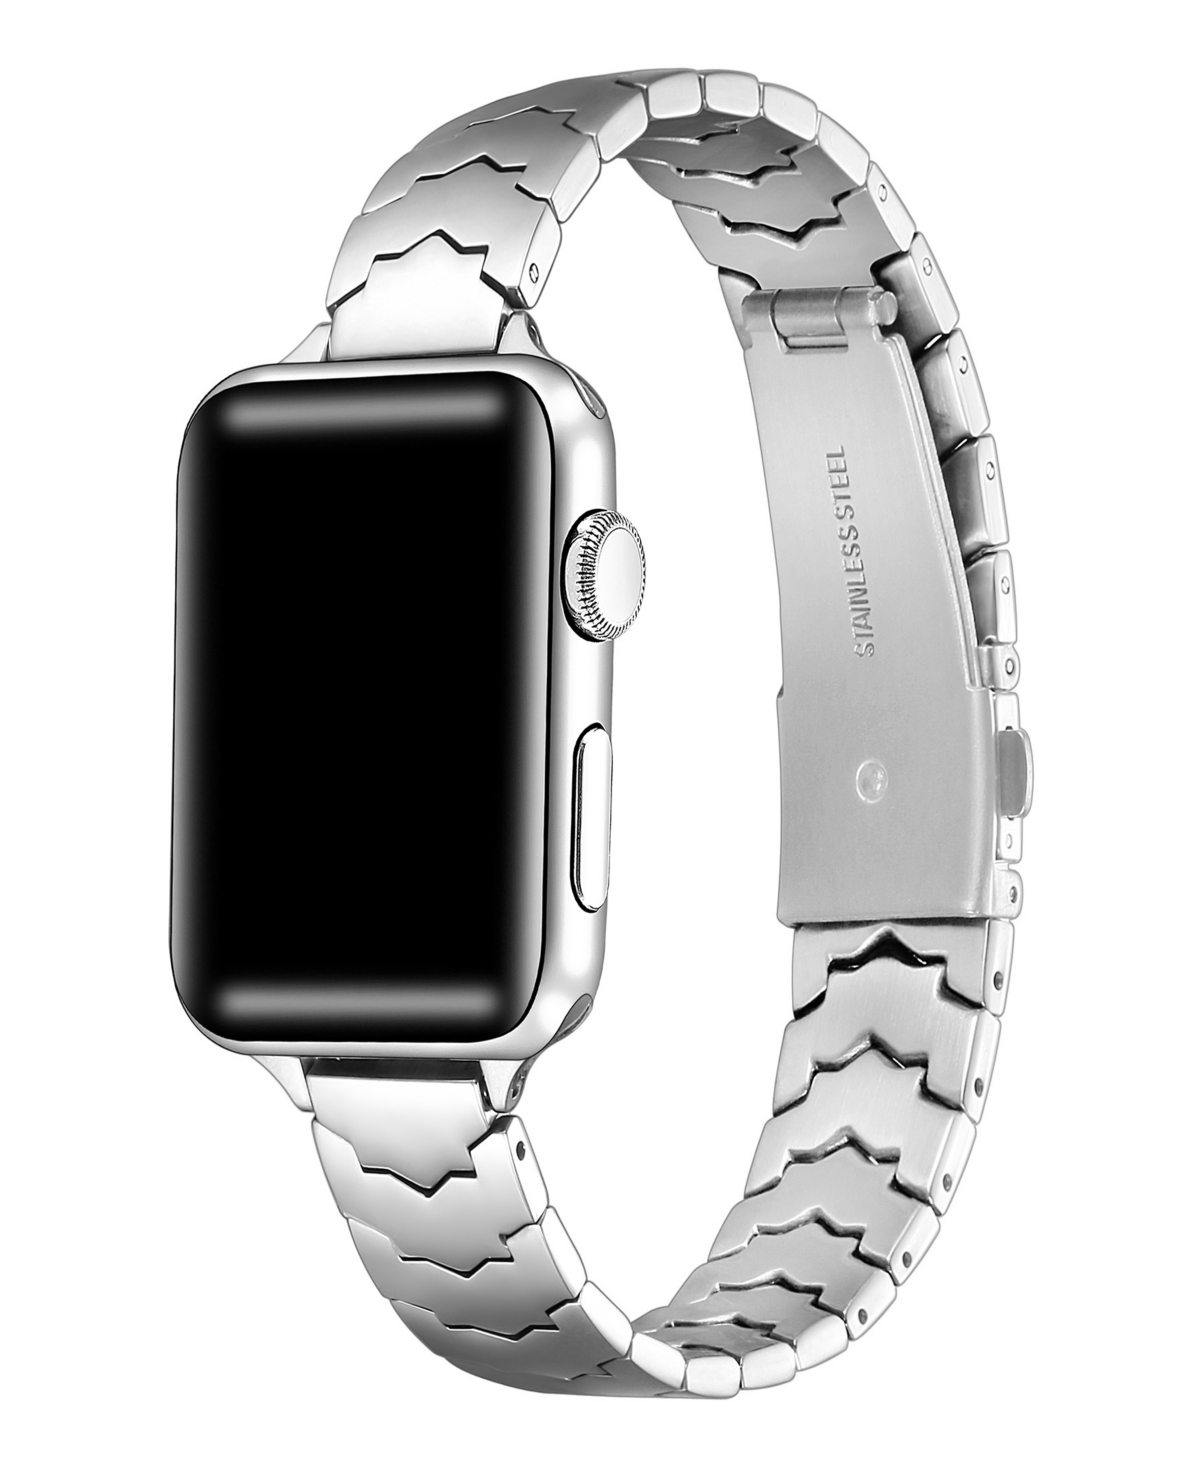 Unisex Iris Stainless Steel Band for Apple Watch Size- 38mm, 40mm, 41mm - Silver